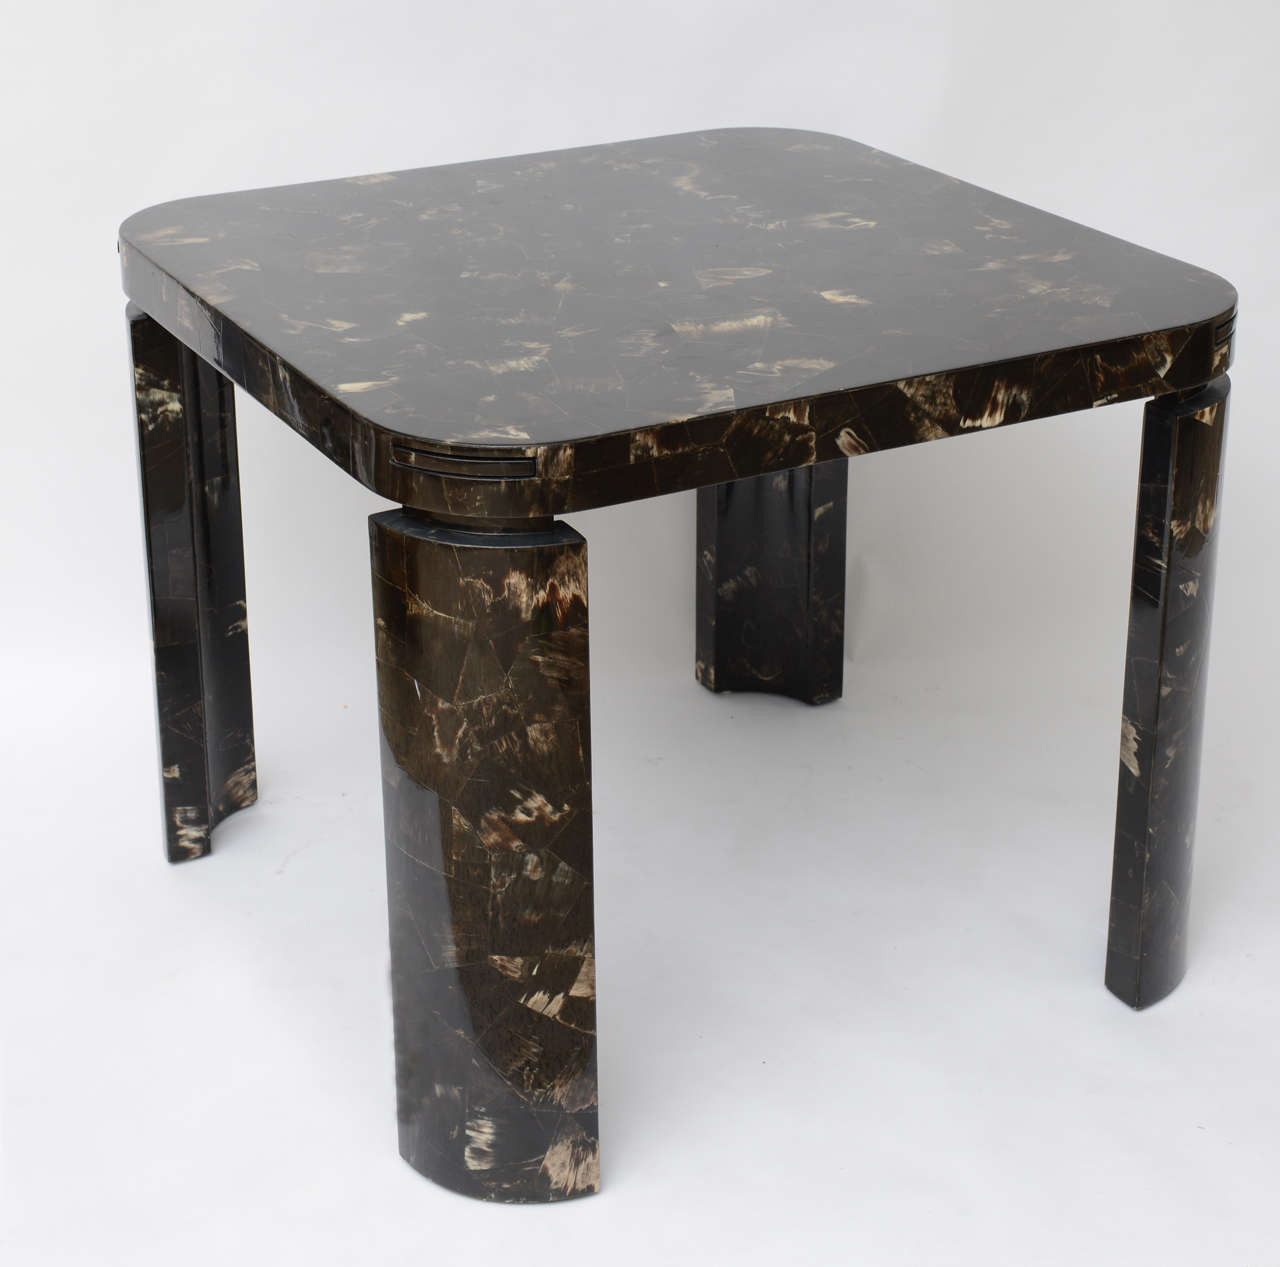 Fashioned from a patchwork of highly-polished horn, this exceptionally well-crafted game table has slide-out drink holders at each corner. A stunning piece.